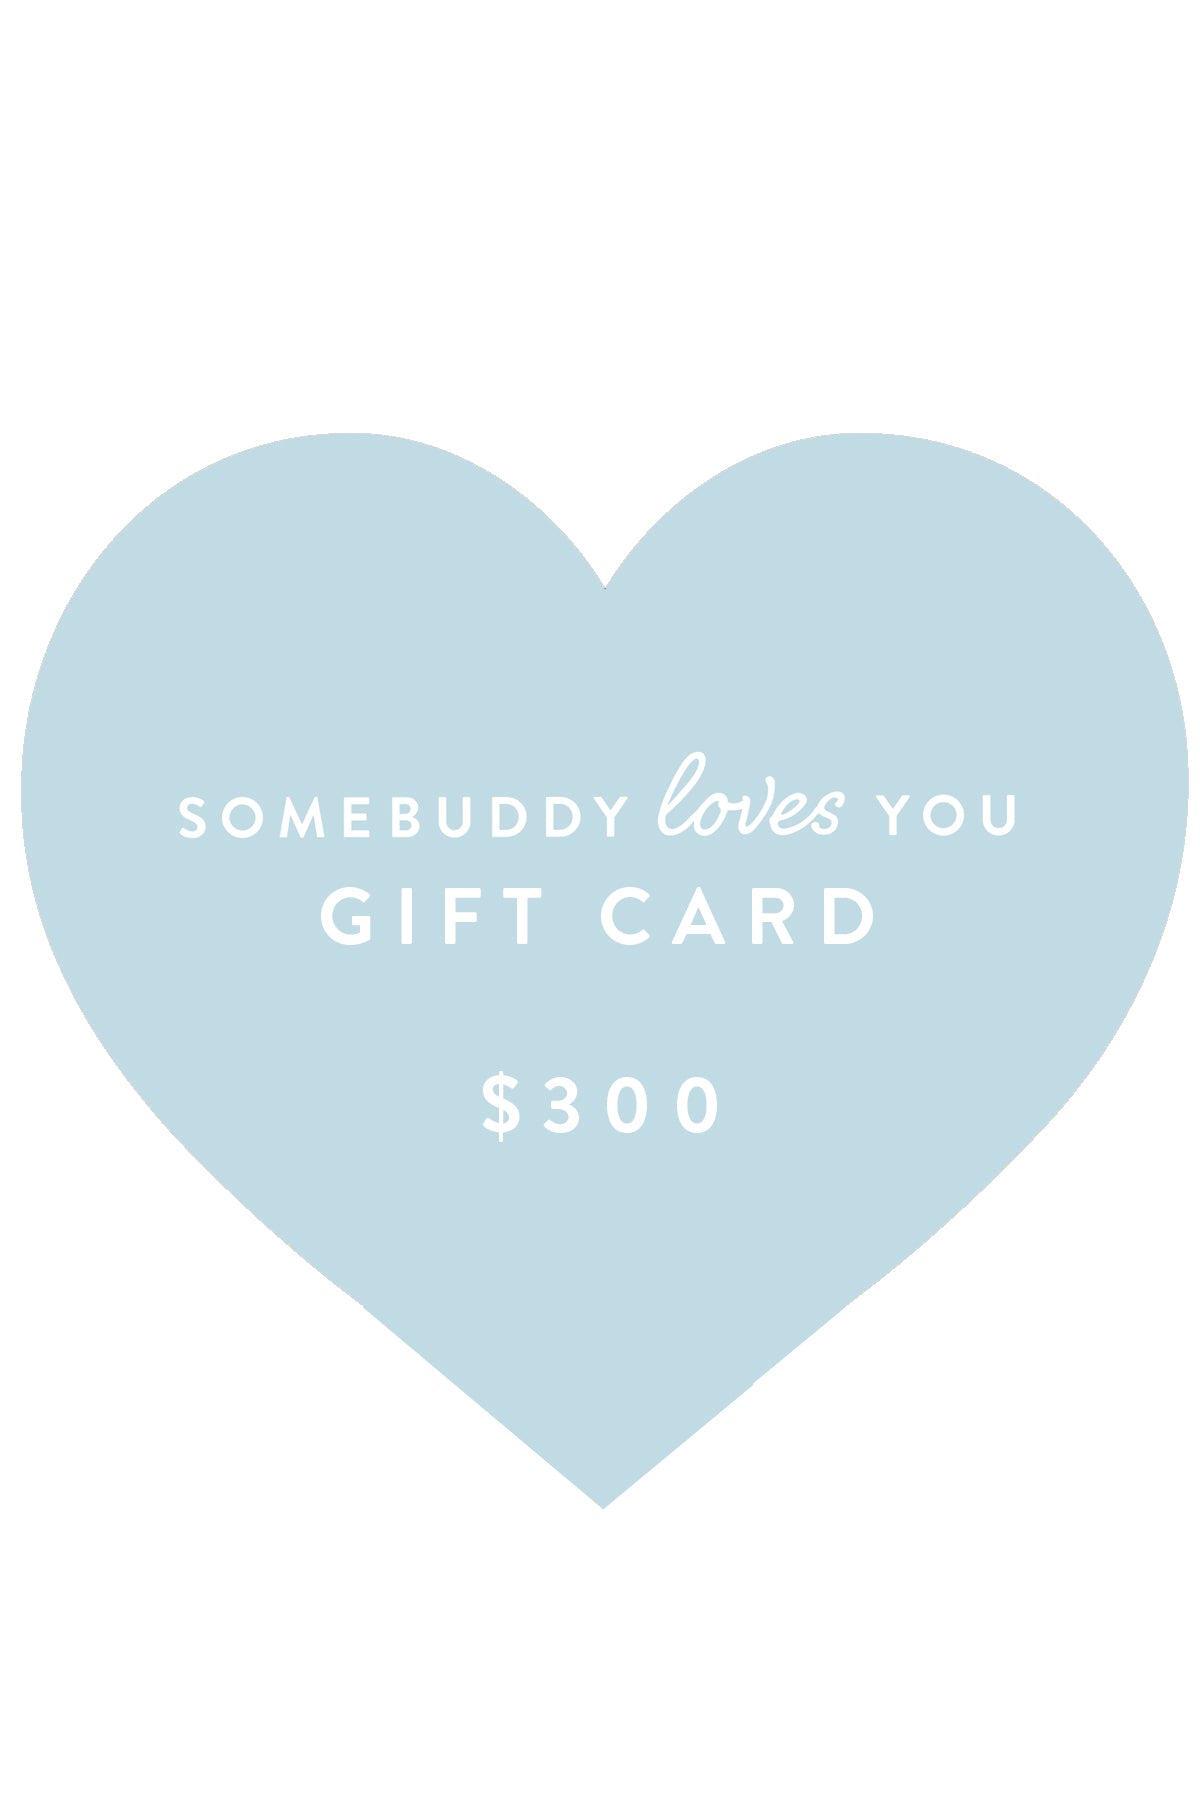 Somebuddy Loves You Gift Card $300